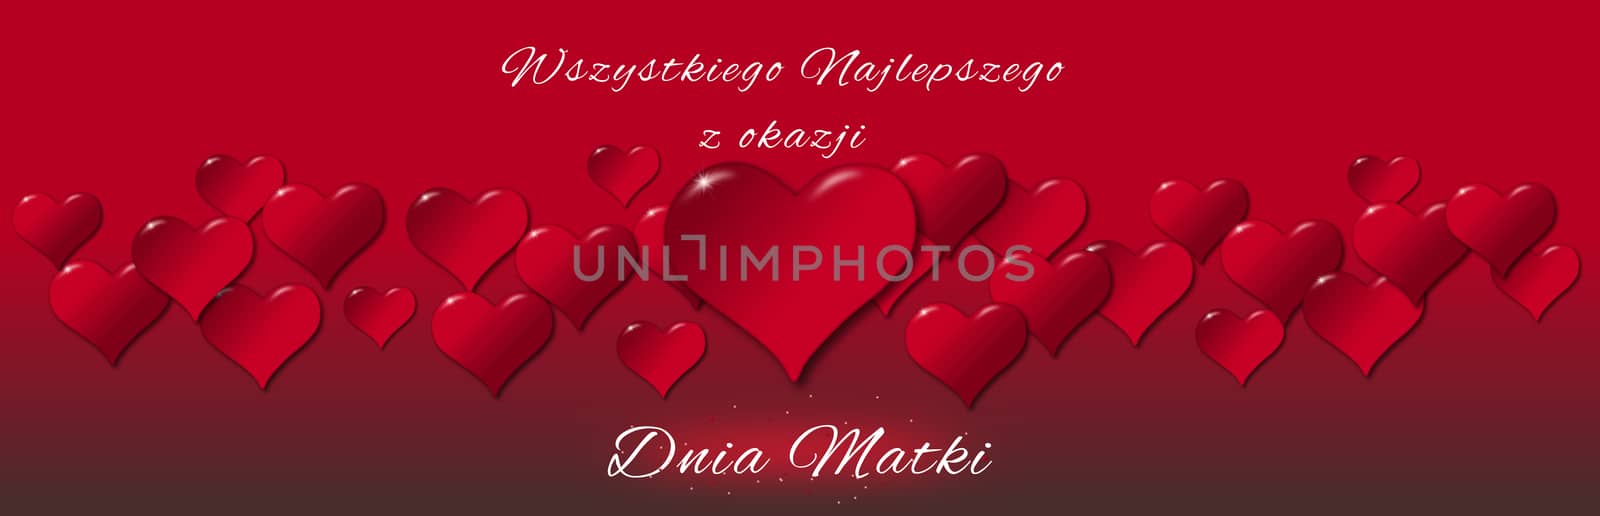 Illustration of hearts for a Mother's Day on a red background